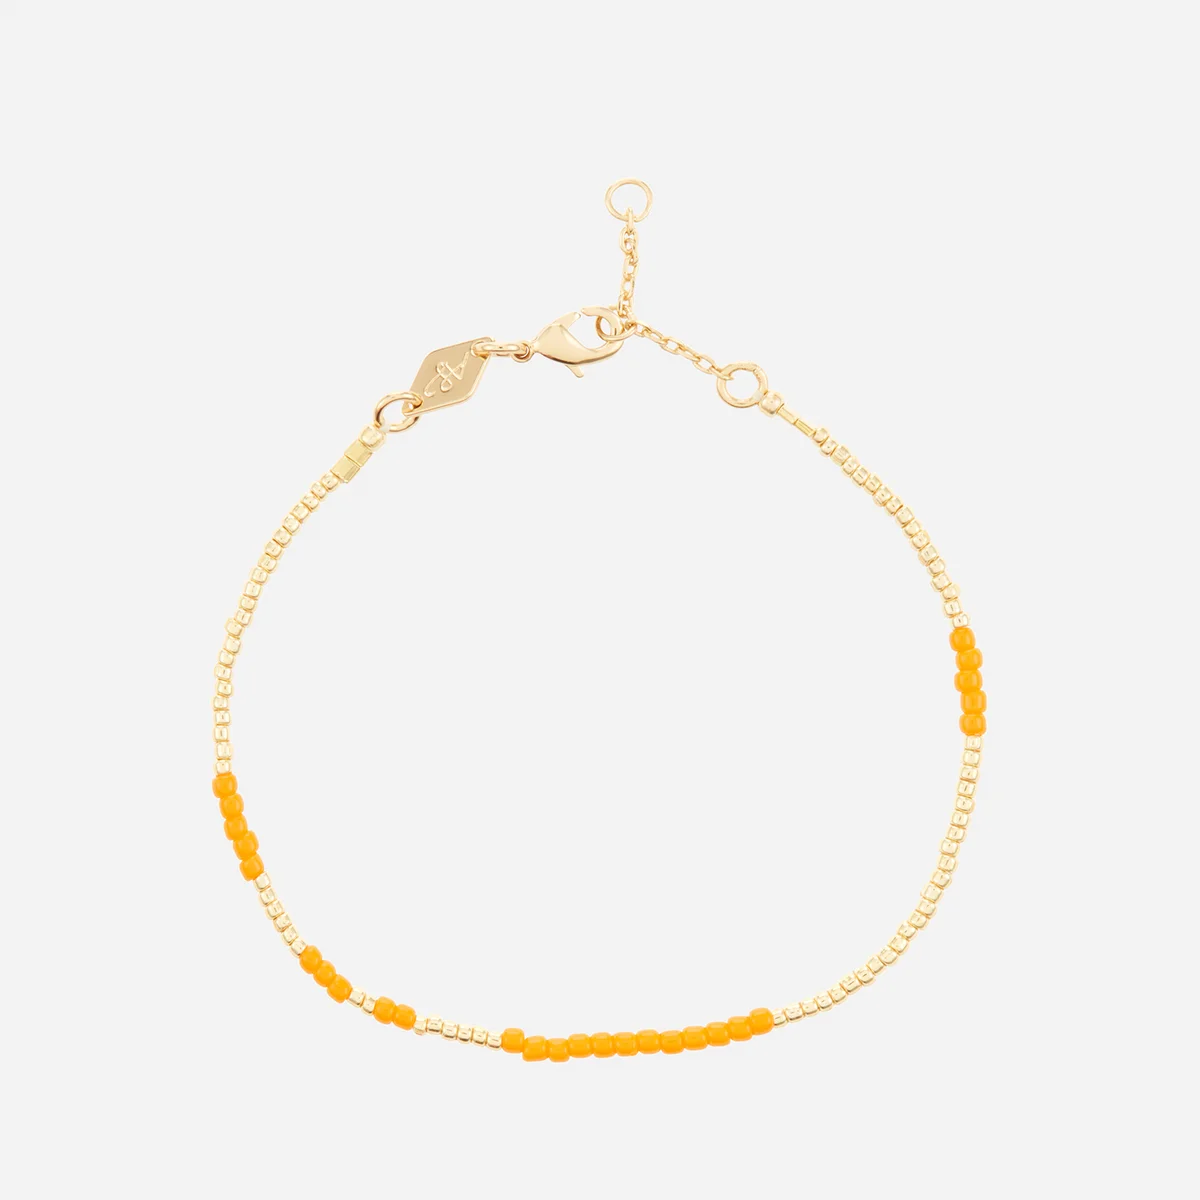 Anni Lu Tangerine and Gold-Plated Bracelet Image 1